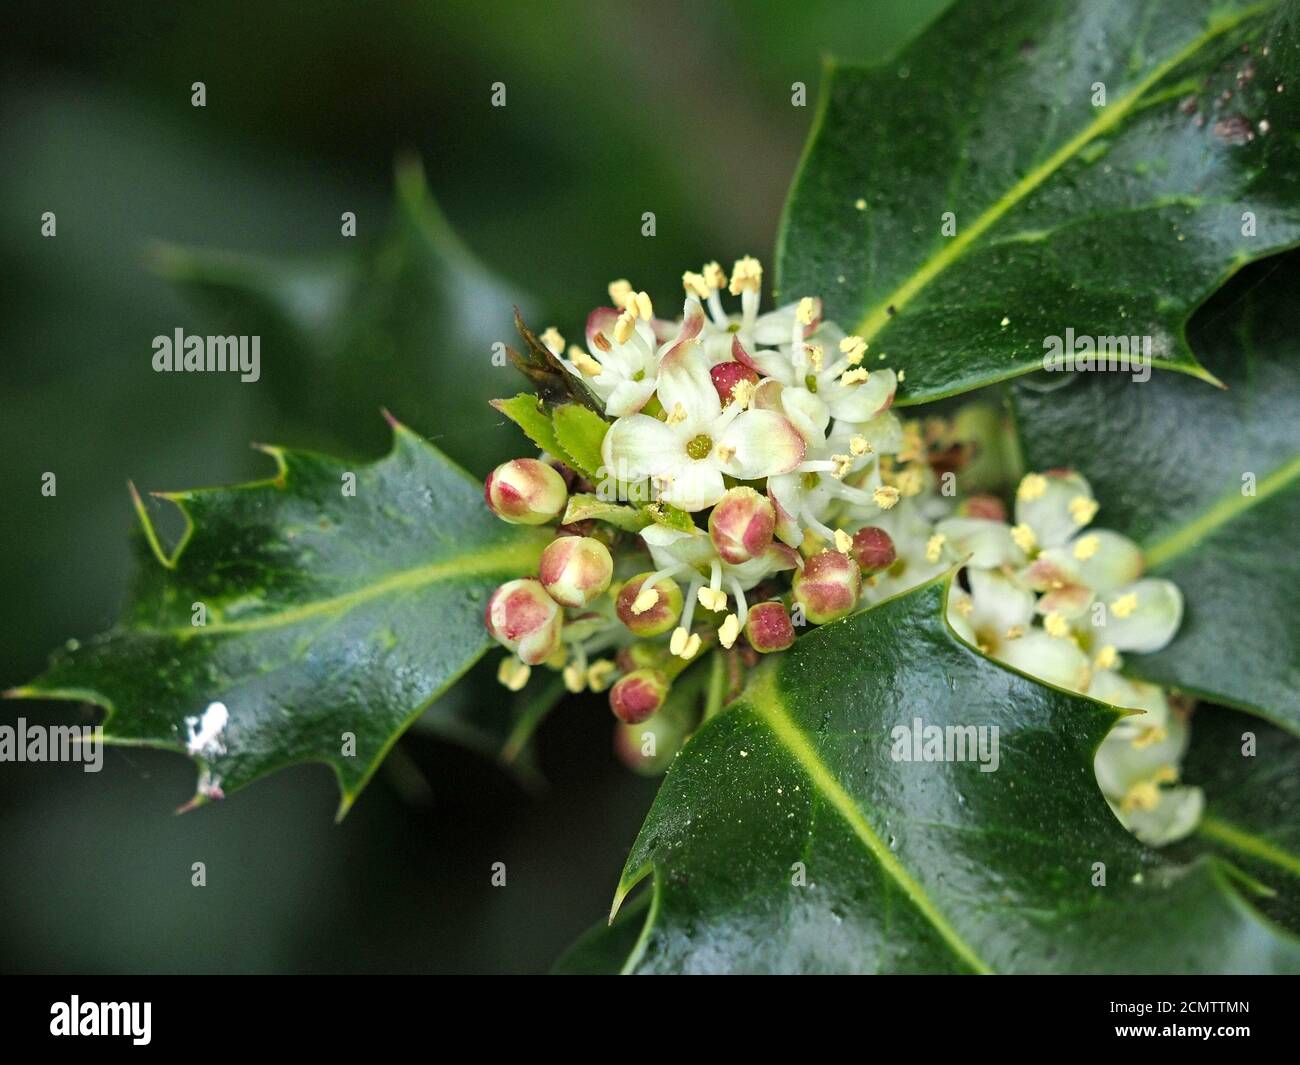 small white flowers emerging from round pink buds of Holly tree (Ilex aquifolium) in axils of spiny glossy dark green leaves in Cumbria, England, UK Stock Photo